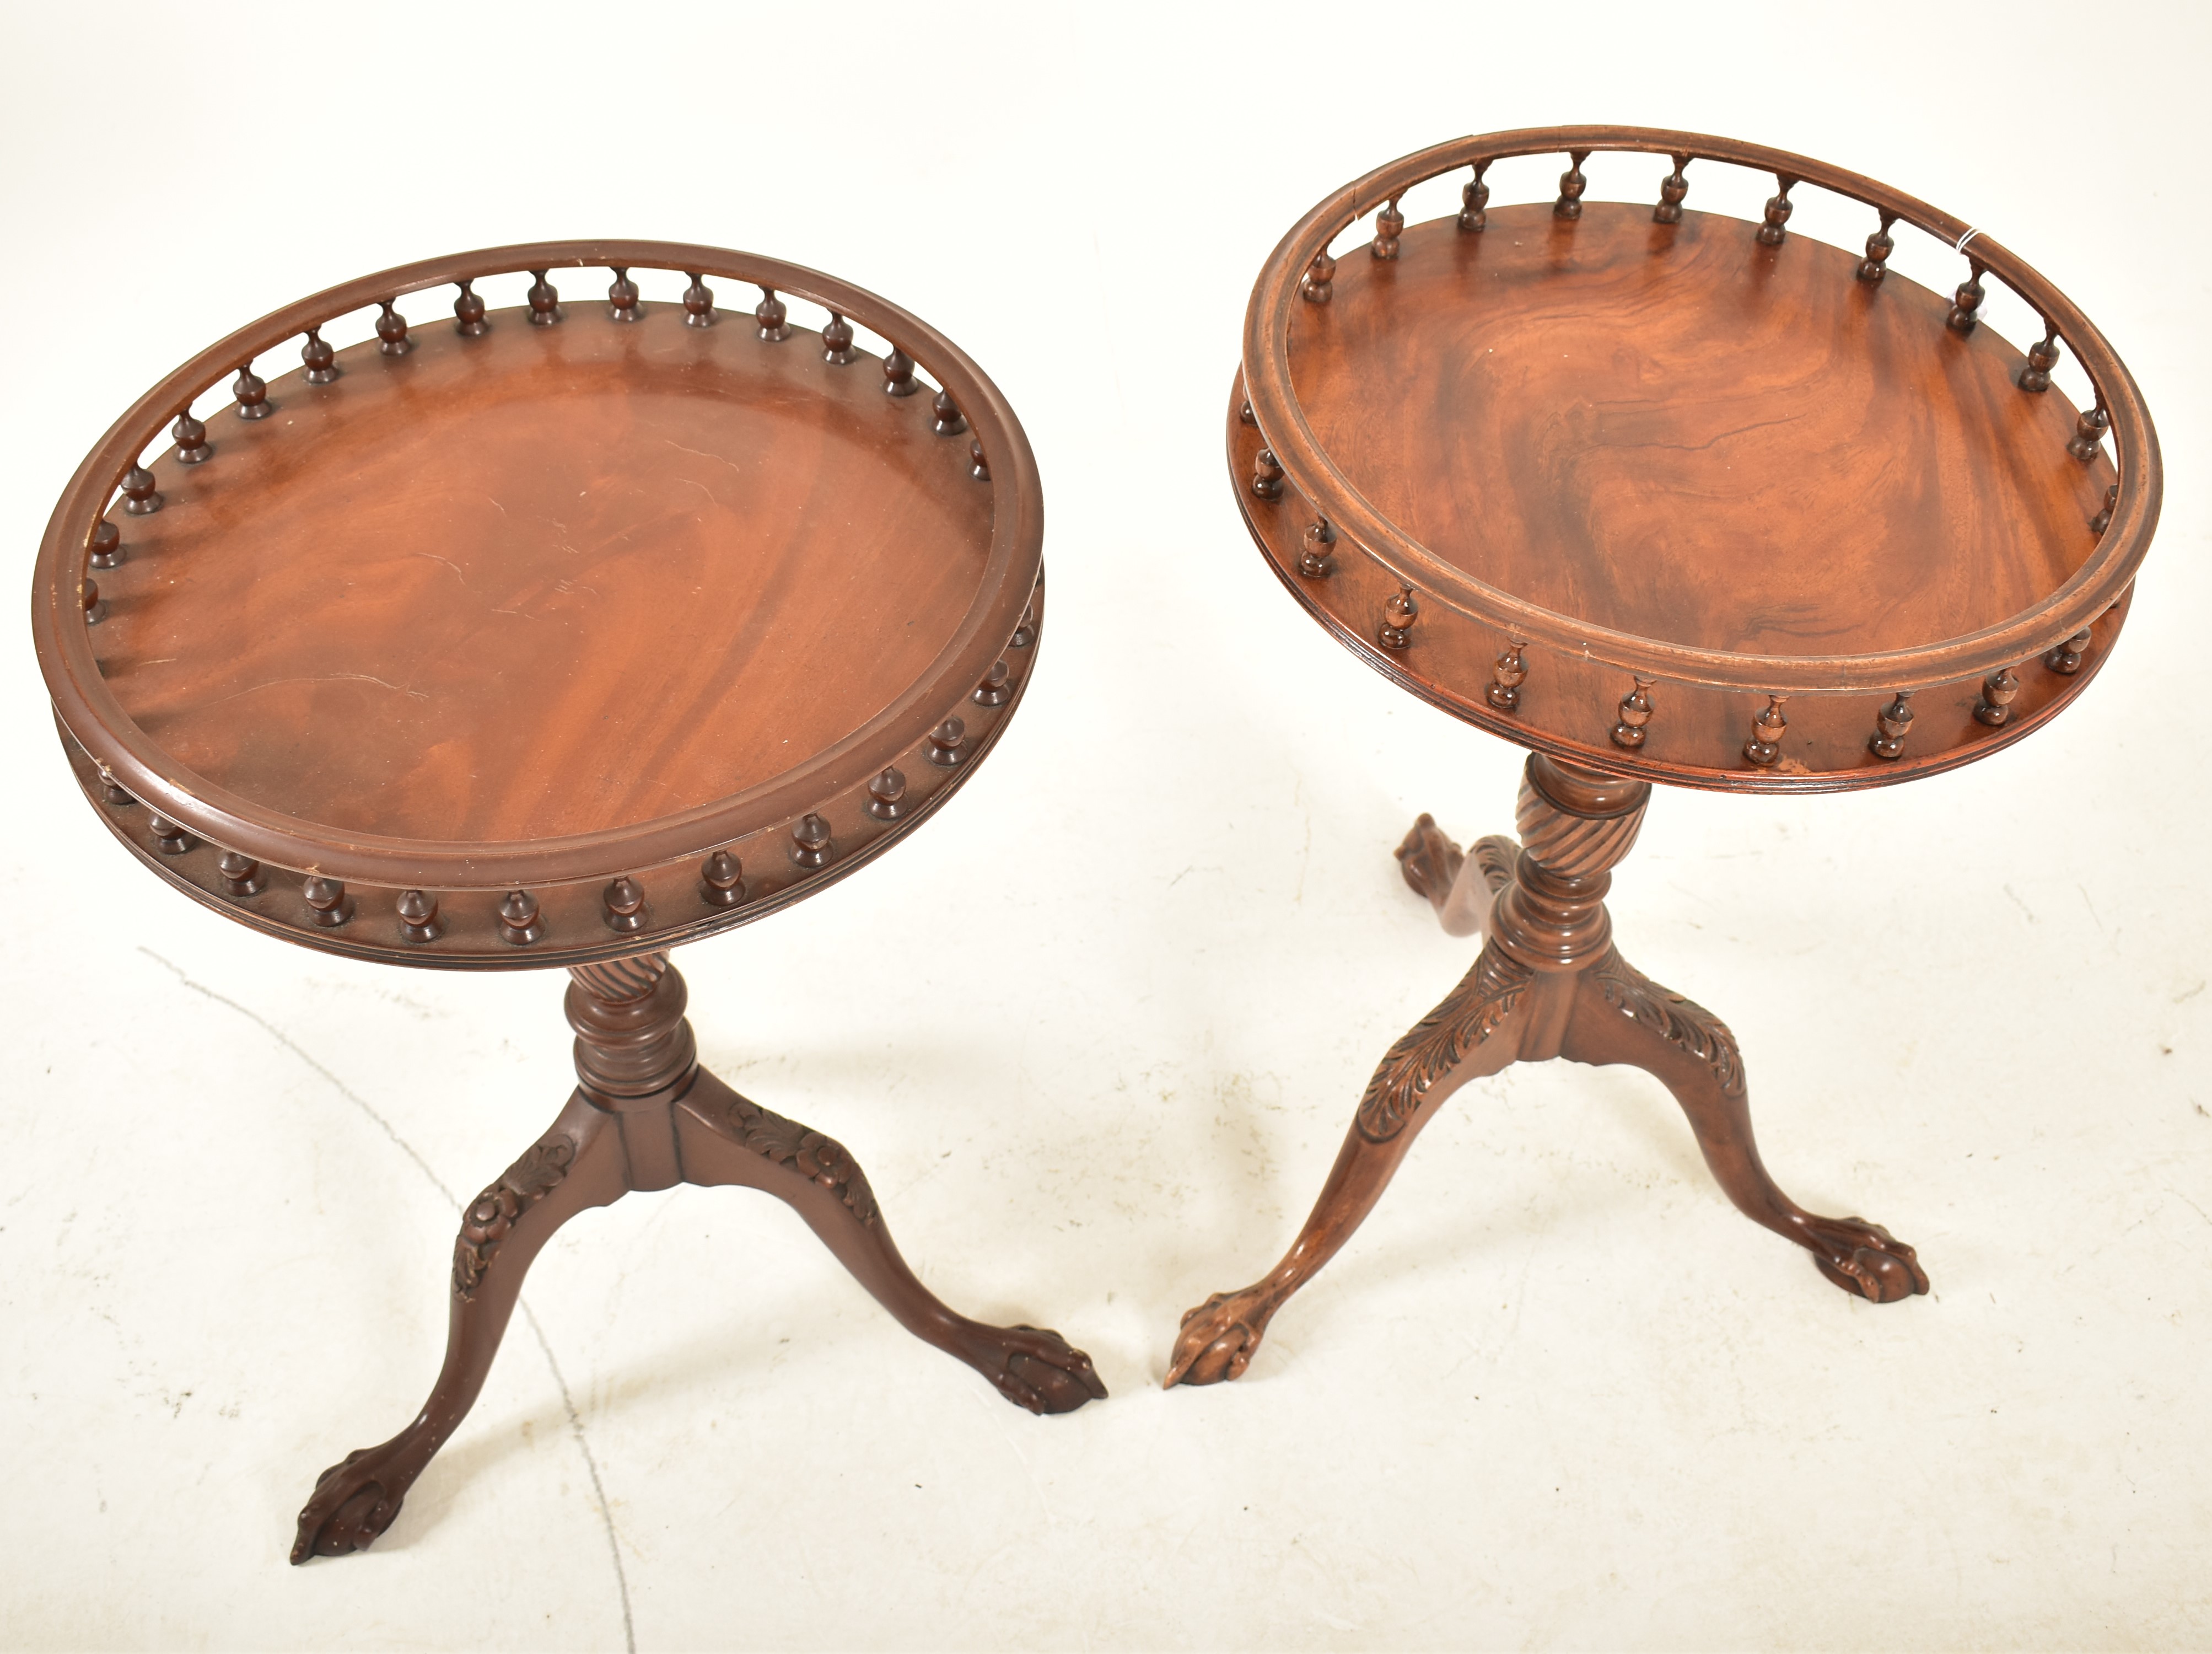 MATCHED PAIR OF REGENCY REVIVAL WINE TRIPOD TABLES - Image 2 of 7